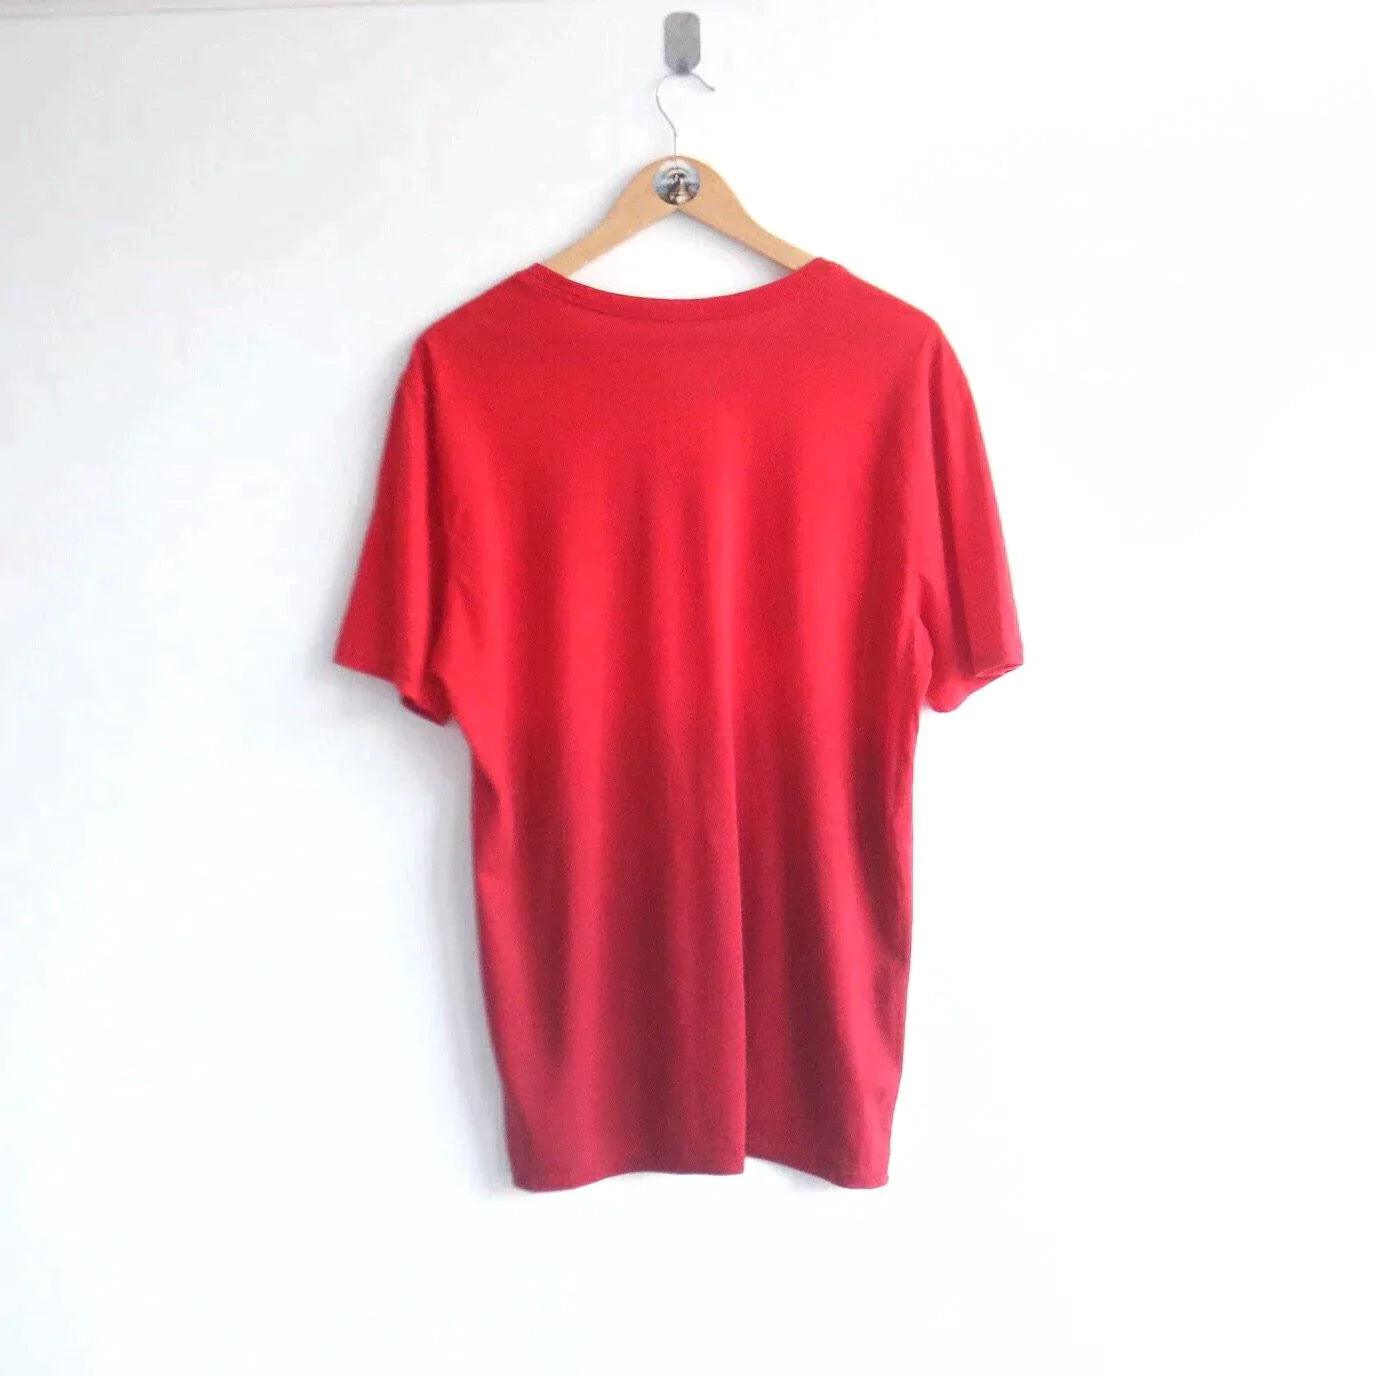 Vintage 90s Nike Spellout Two Tone Red Tee (L) (L) - Known Source